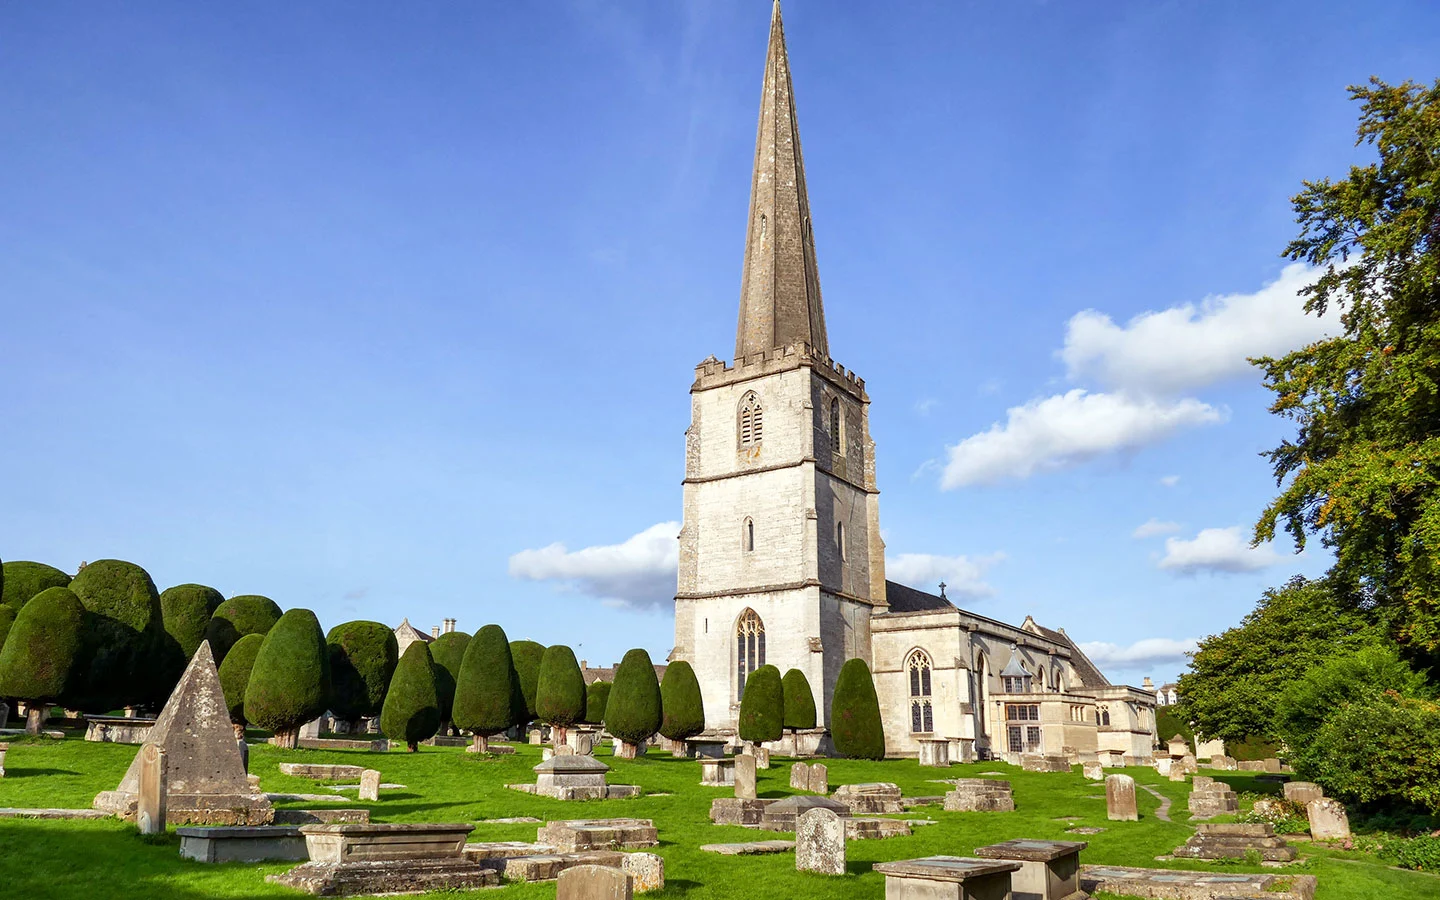 St Mary's Church in Painswick